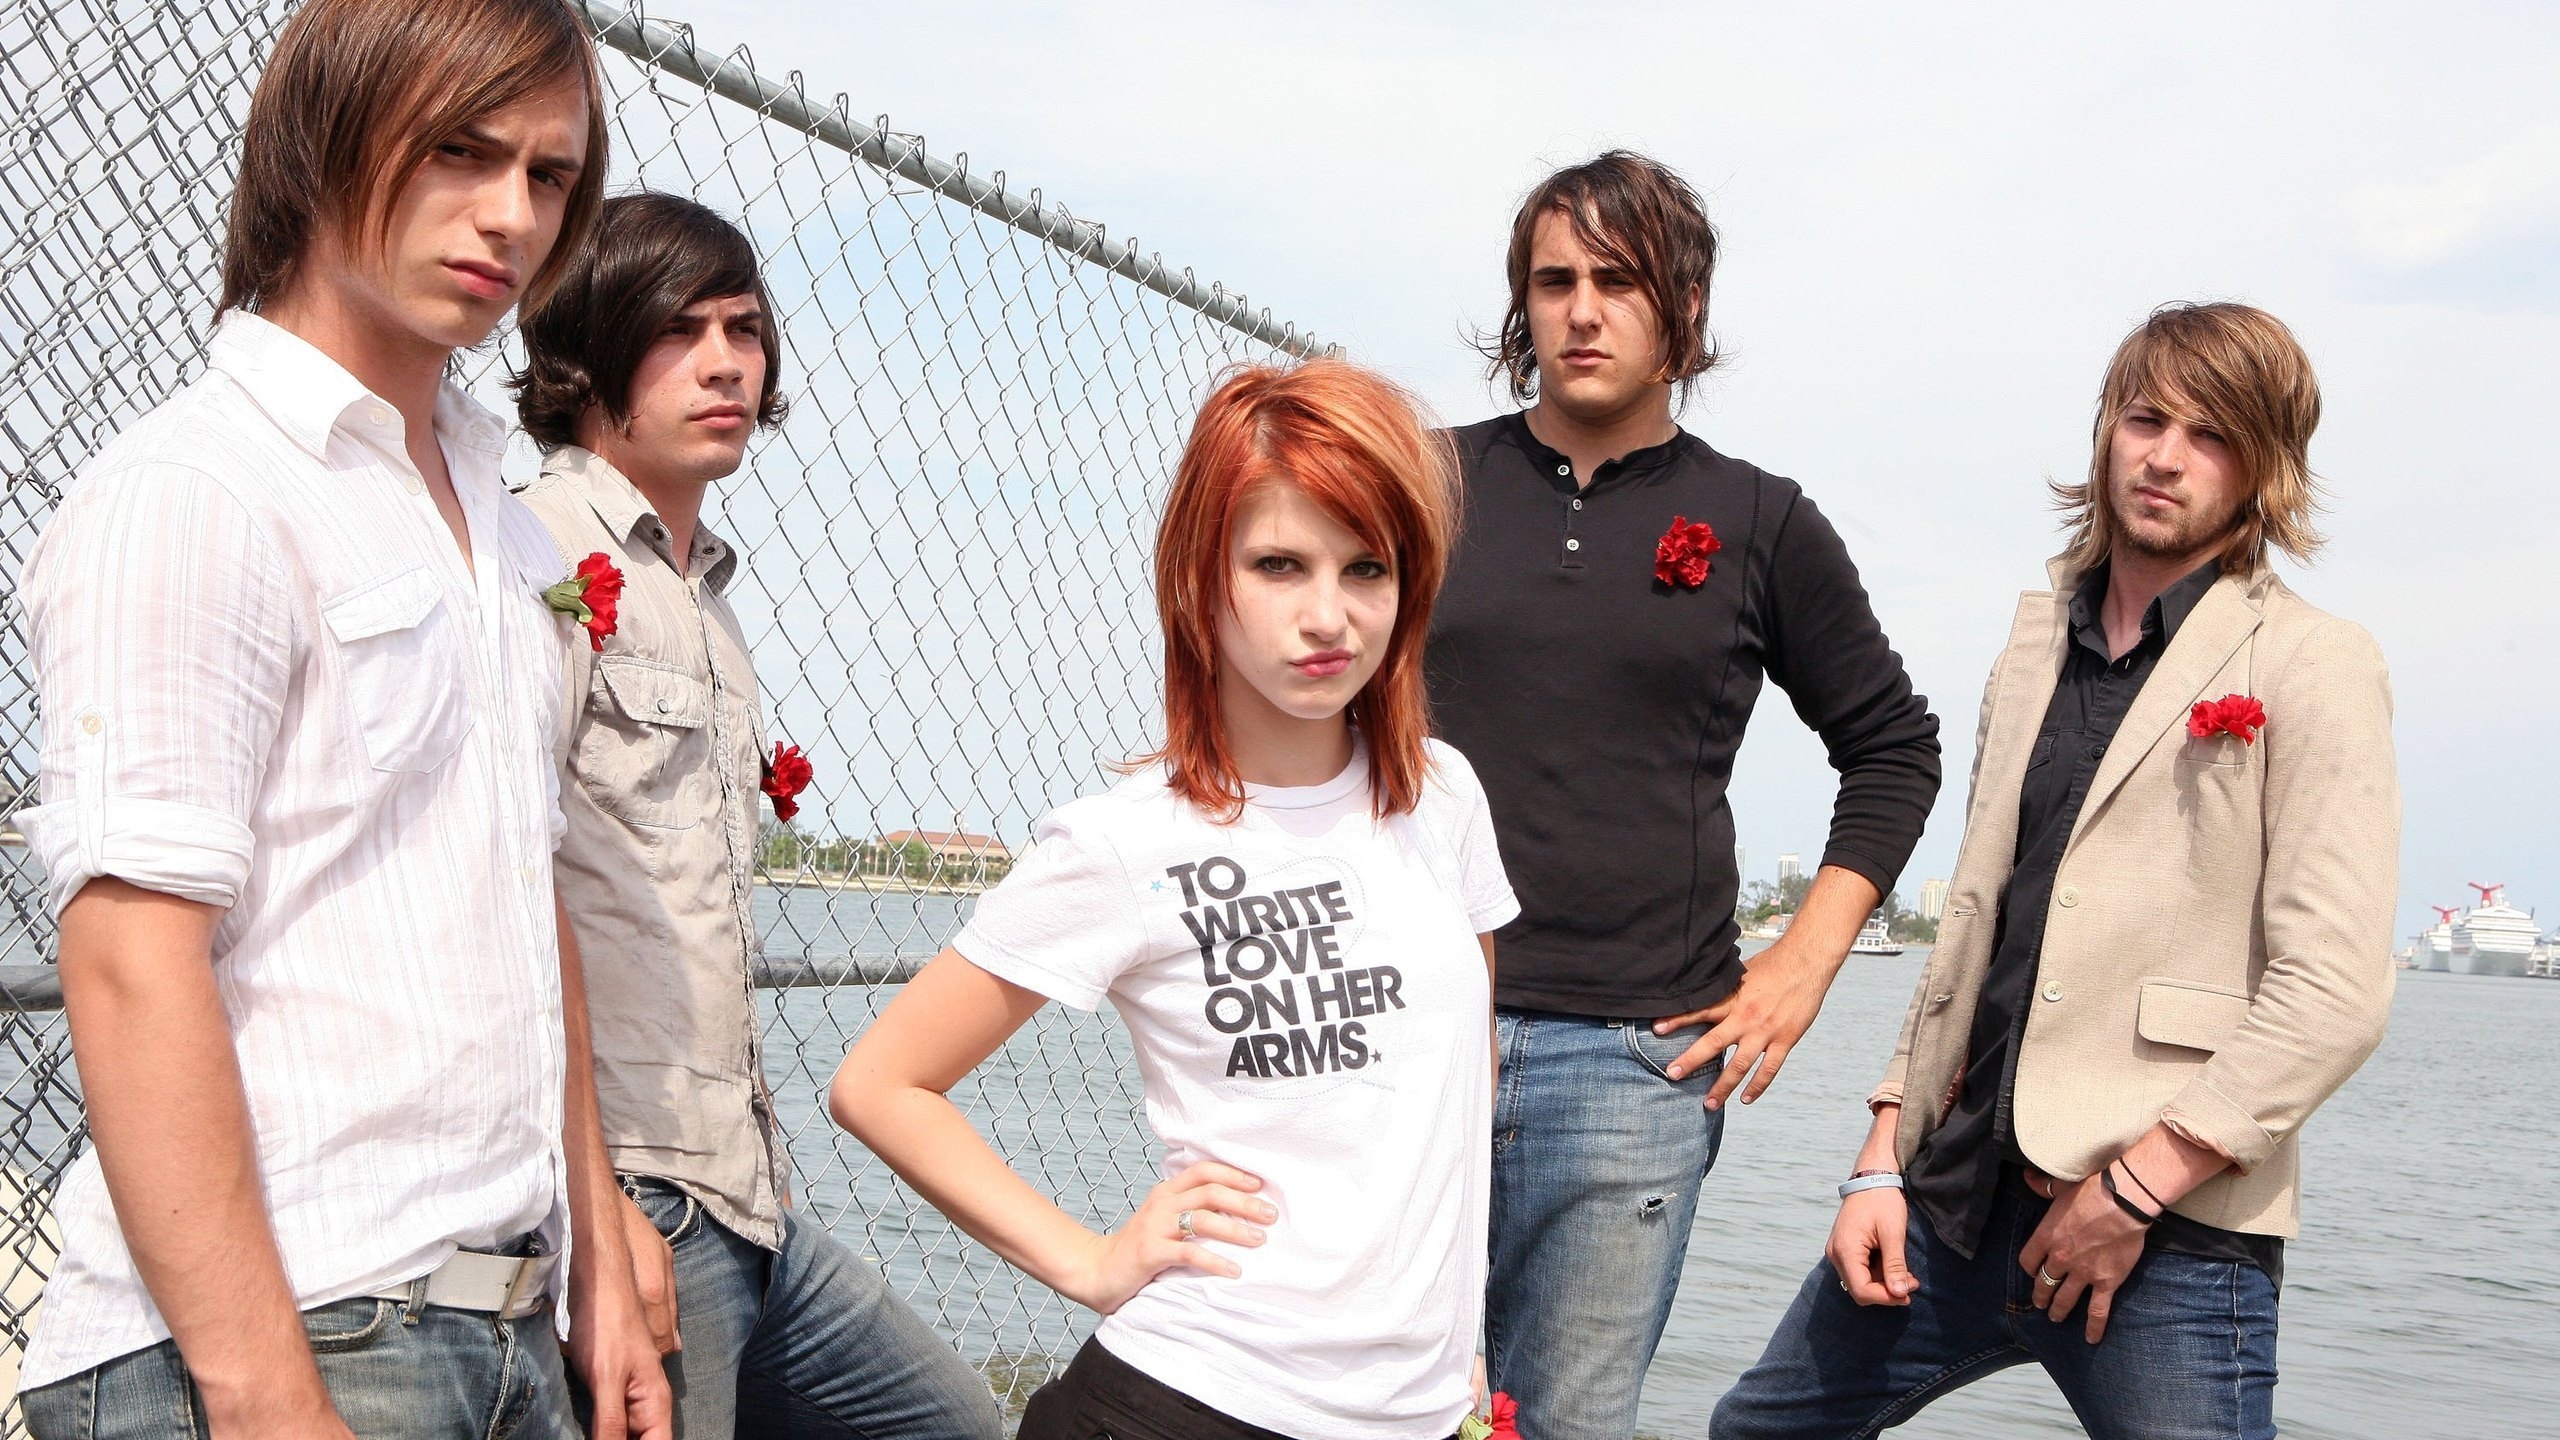 Paramore and Hayley Williams for 2560x1440 HDTV resolution